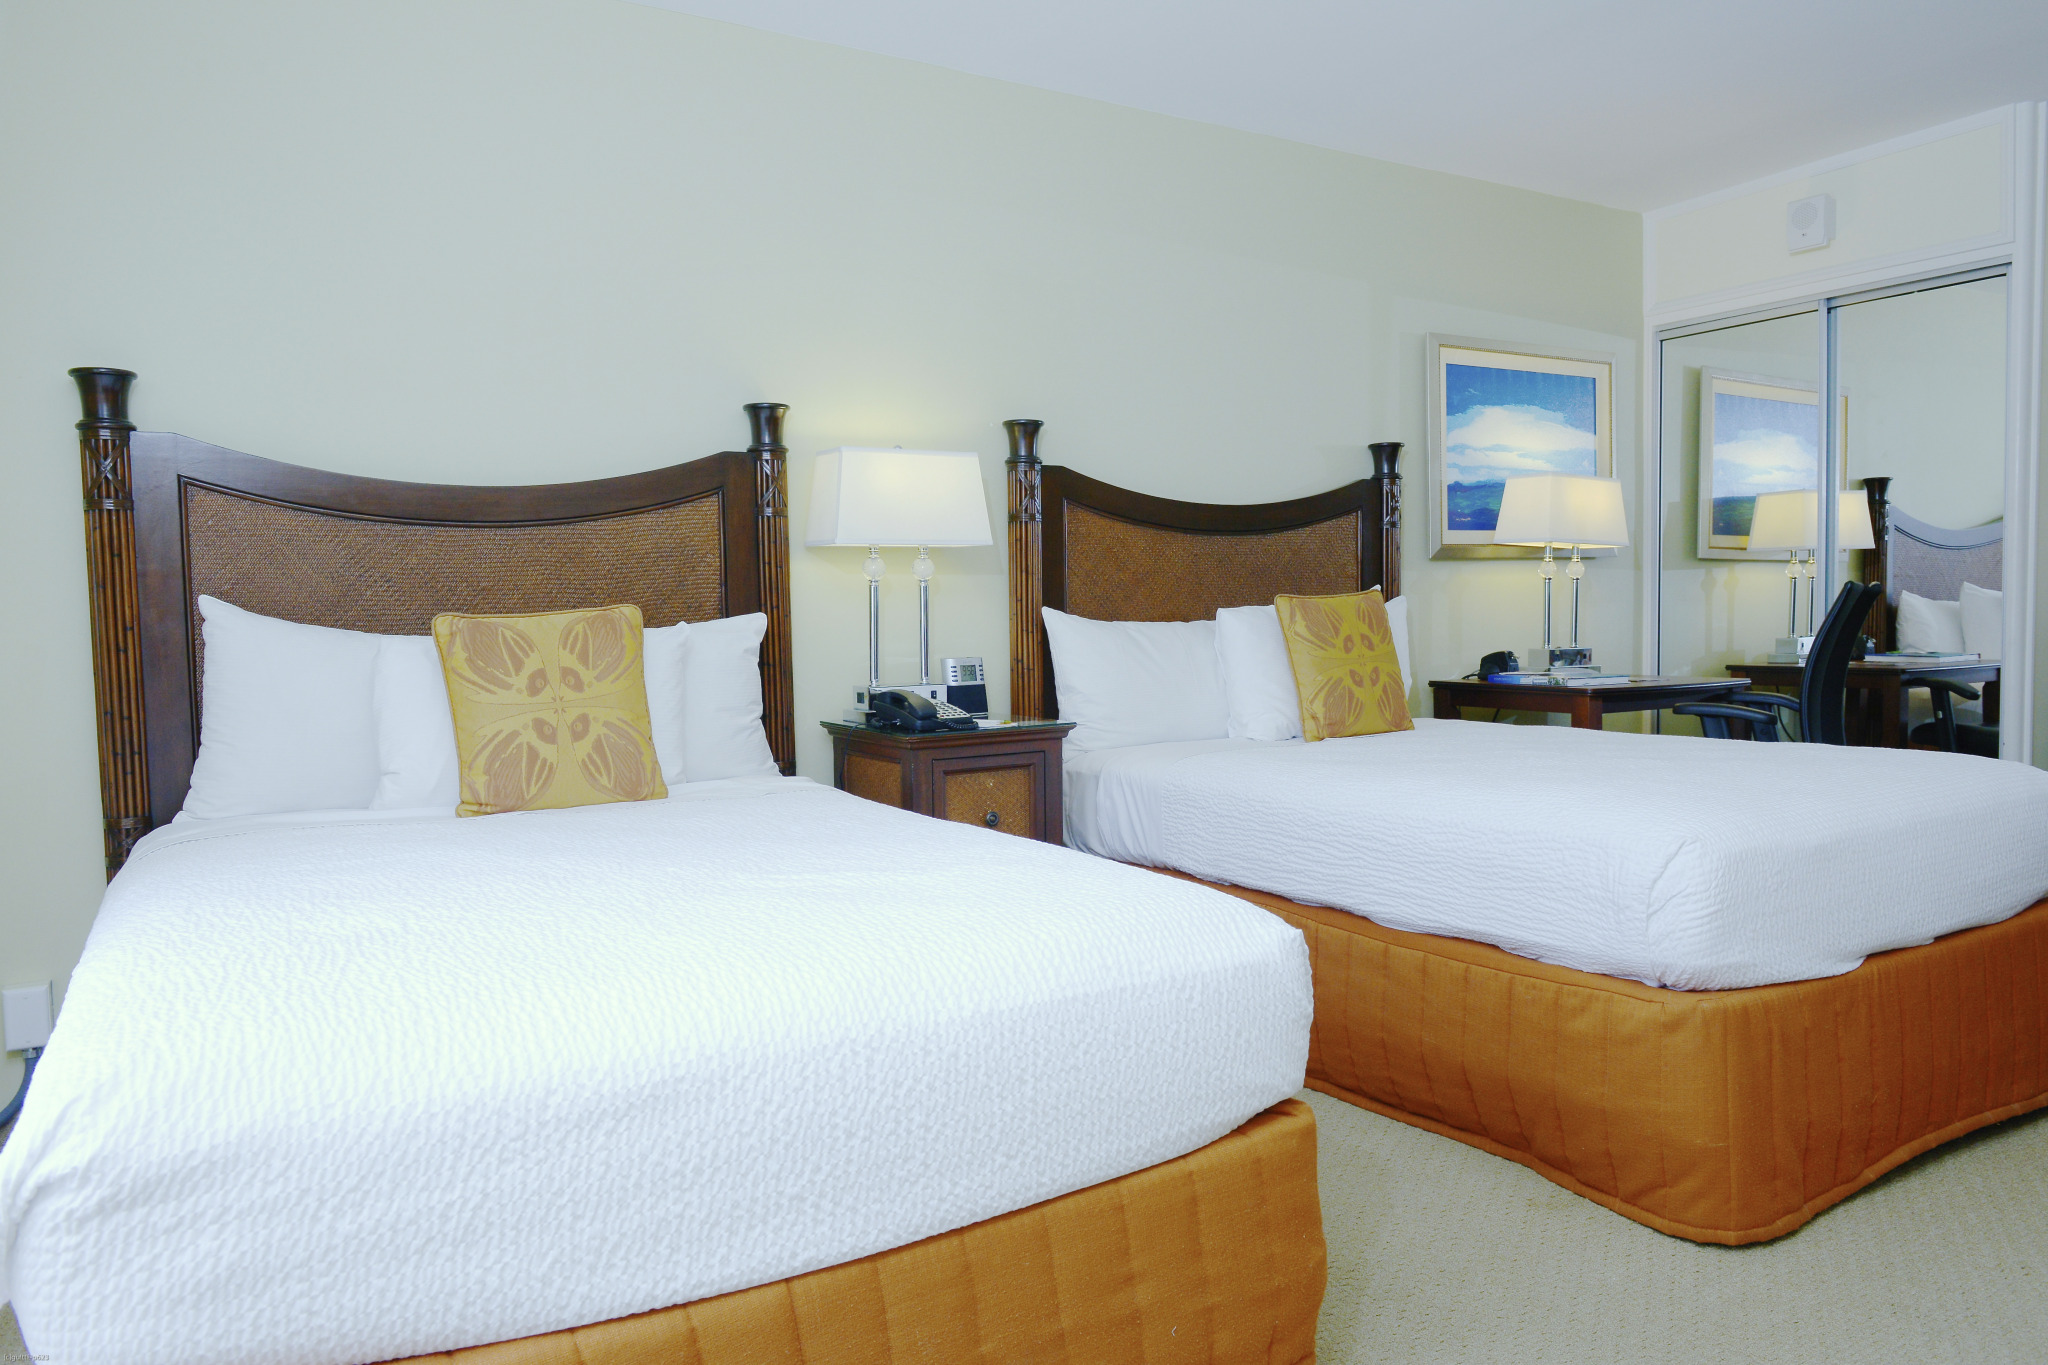 Courtyard Marriott Waikiki is an ideally-located Oahu Hotel near top Dining, Attractions, and Honolulu activities.